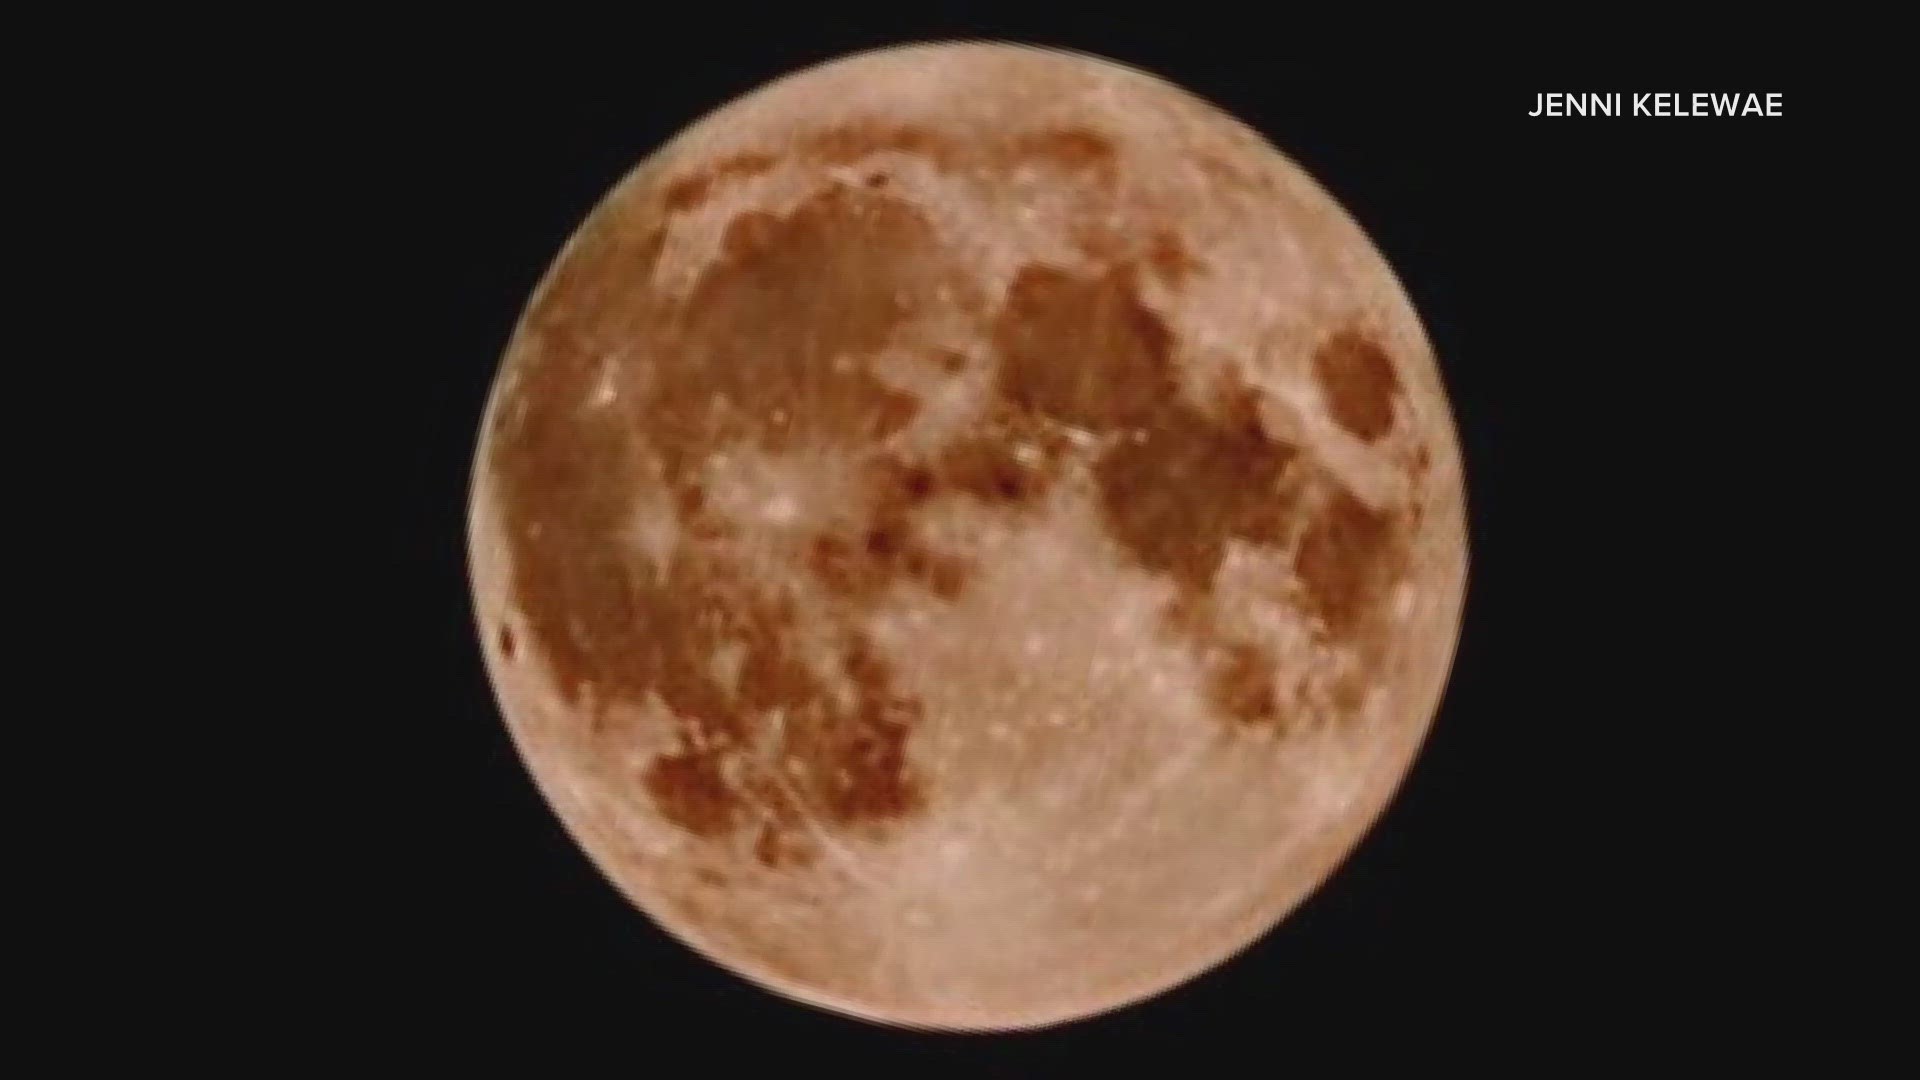 What's even rarer—it's the second supermoon to happen in the same calendar month, which hasn't happened since 2018.